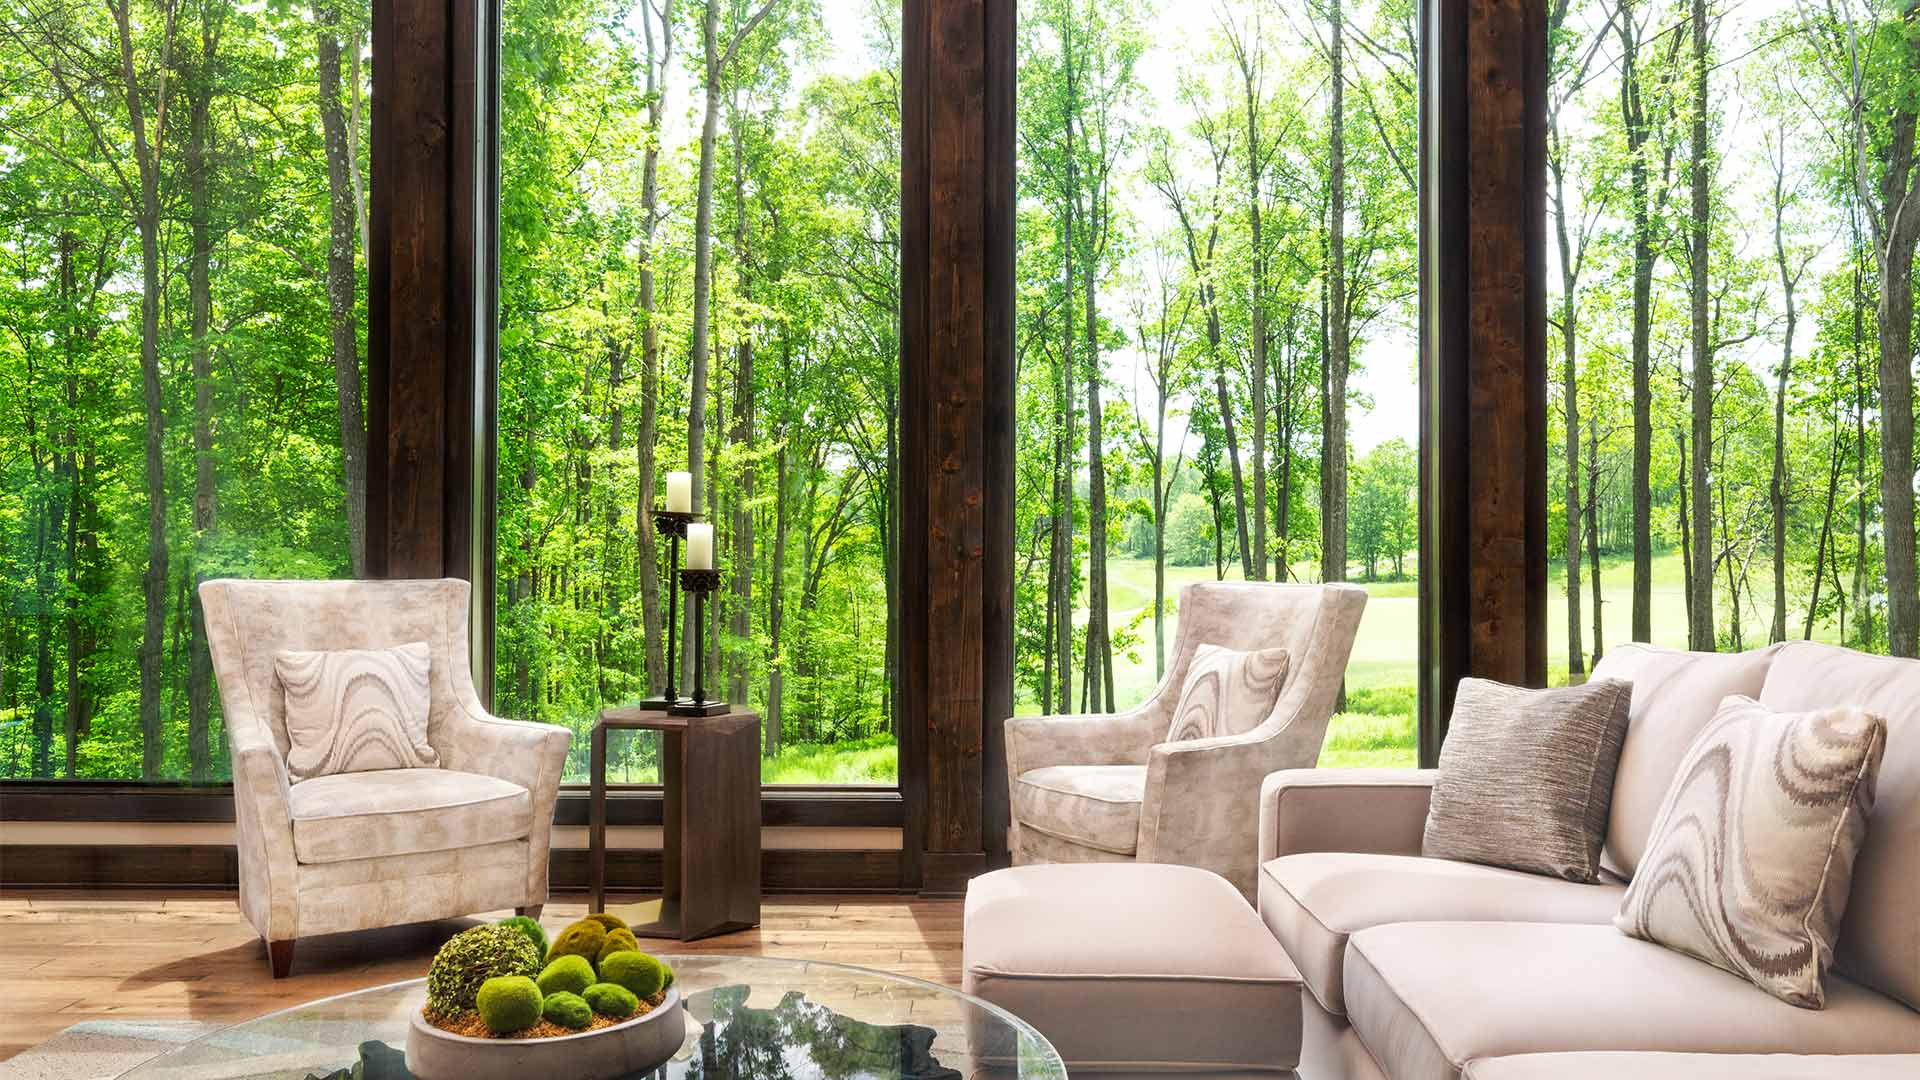 interior shot of the dogwood sitting area. There are two cream colored chairs and a matching couch around a coffee table. There are floor to ceiling windows give a view of the forest outside